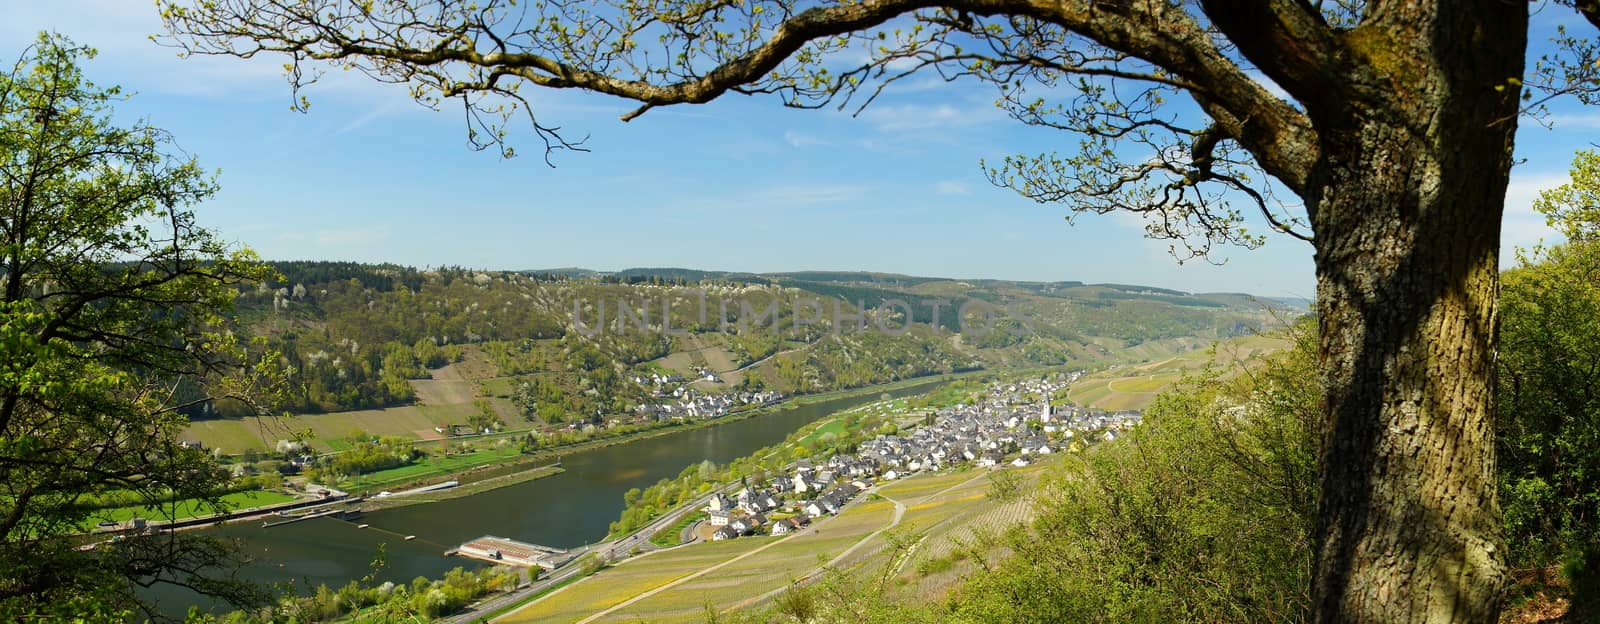 Moselle Valley with Kövenig, Enkirch and on the plateau in the middle the village of Montroyal